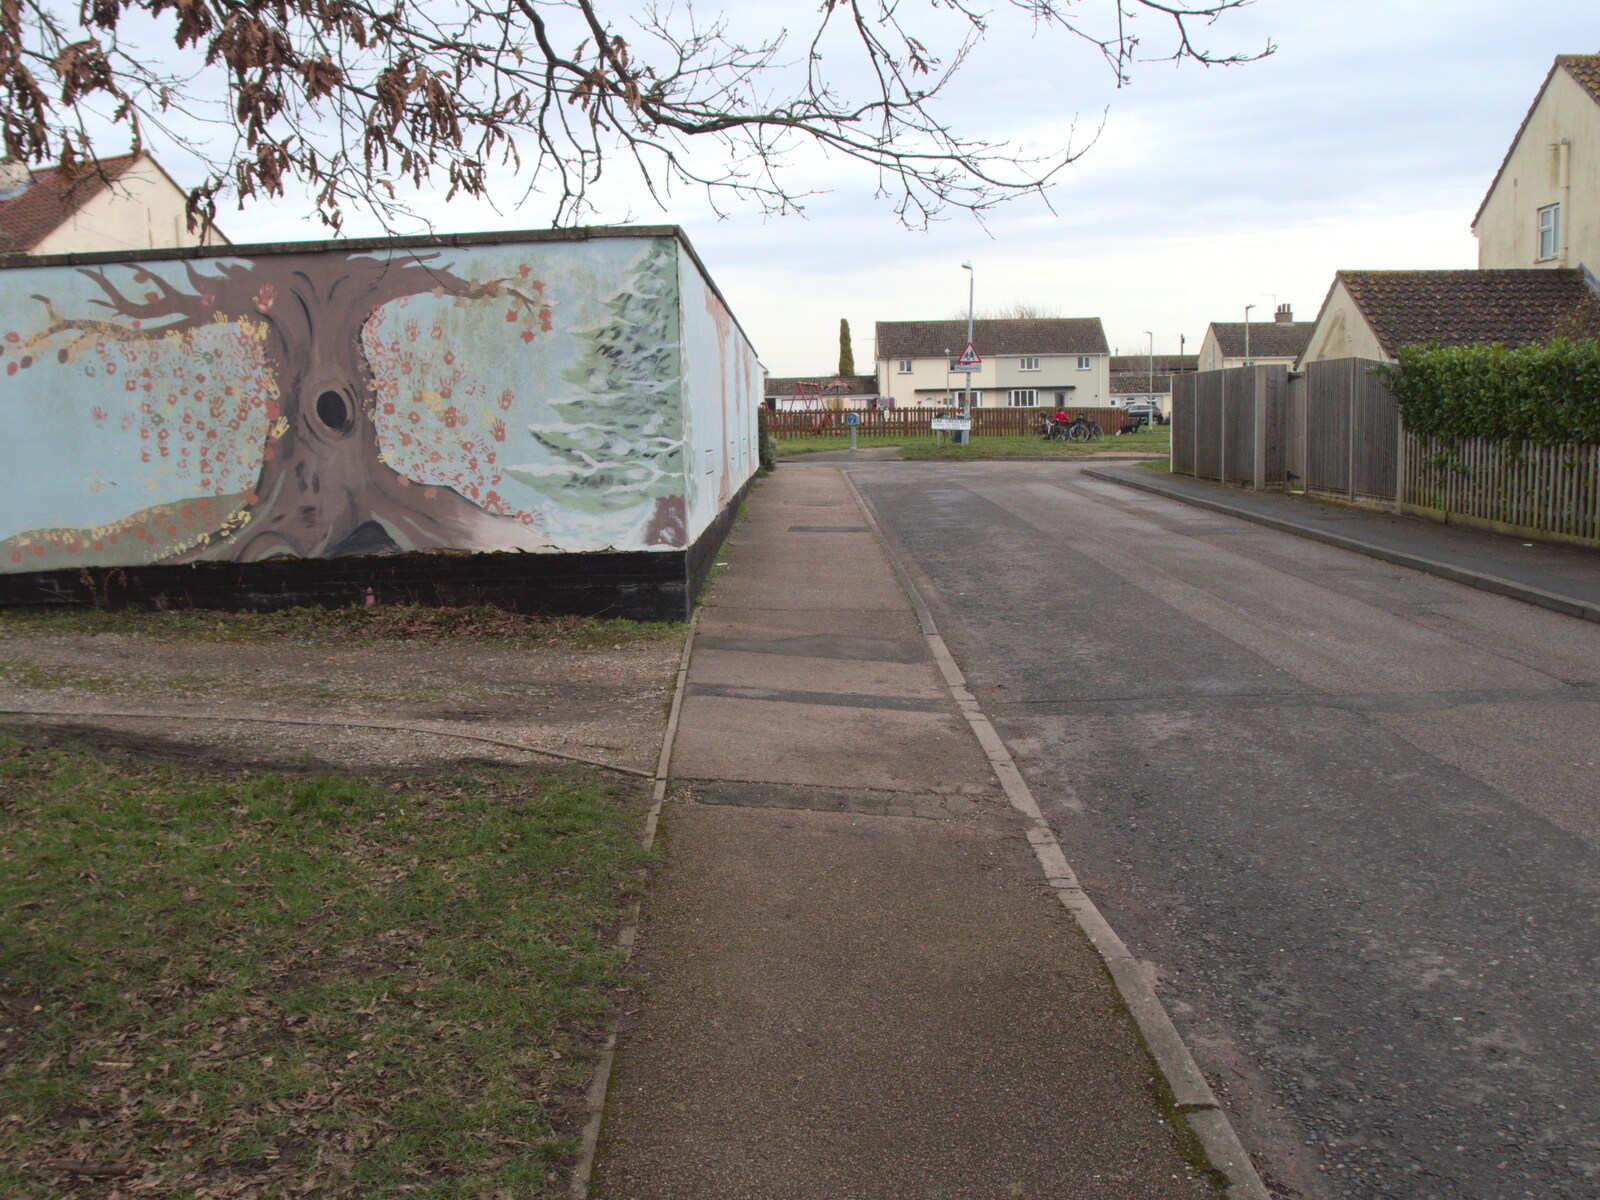 The tree mural from The Old Sewage Works, The Avenue, Brome, Suffolk - 20th February 2021